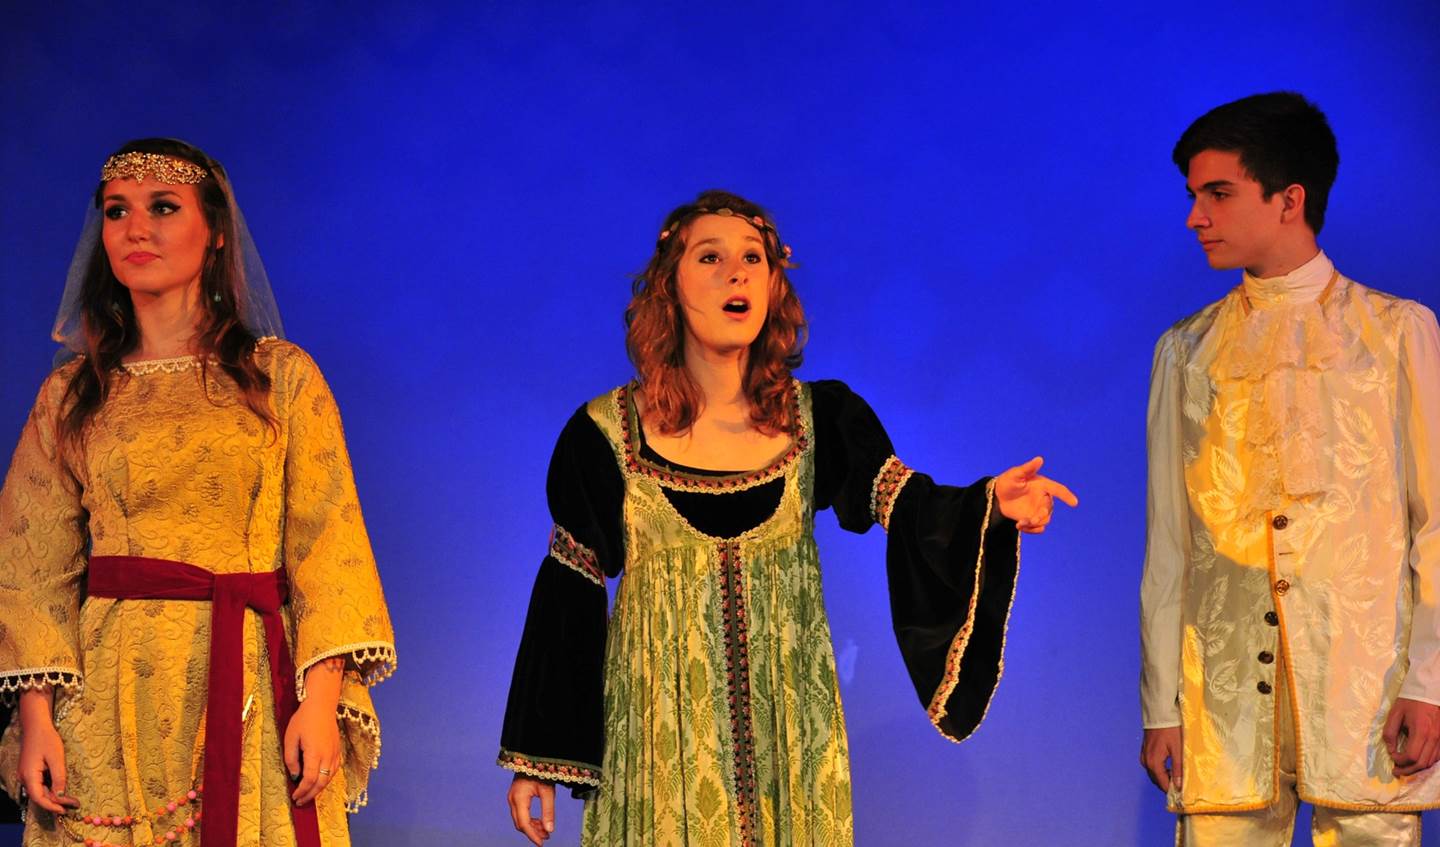 A young woman is singing with her hand outstretched forward while a young man looks at her and another young lady is looking off into the distance.